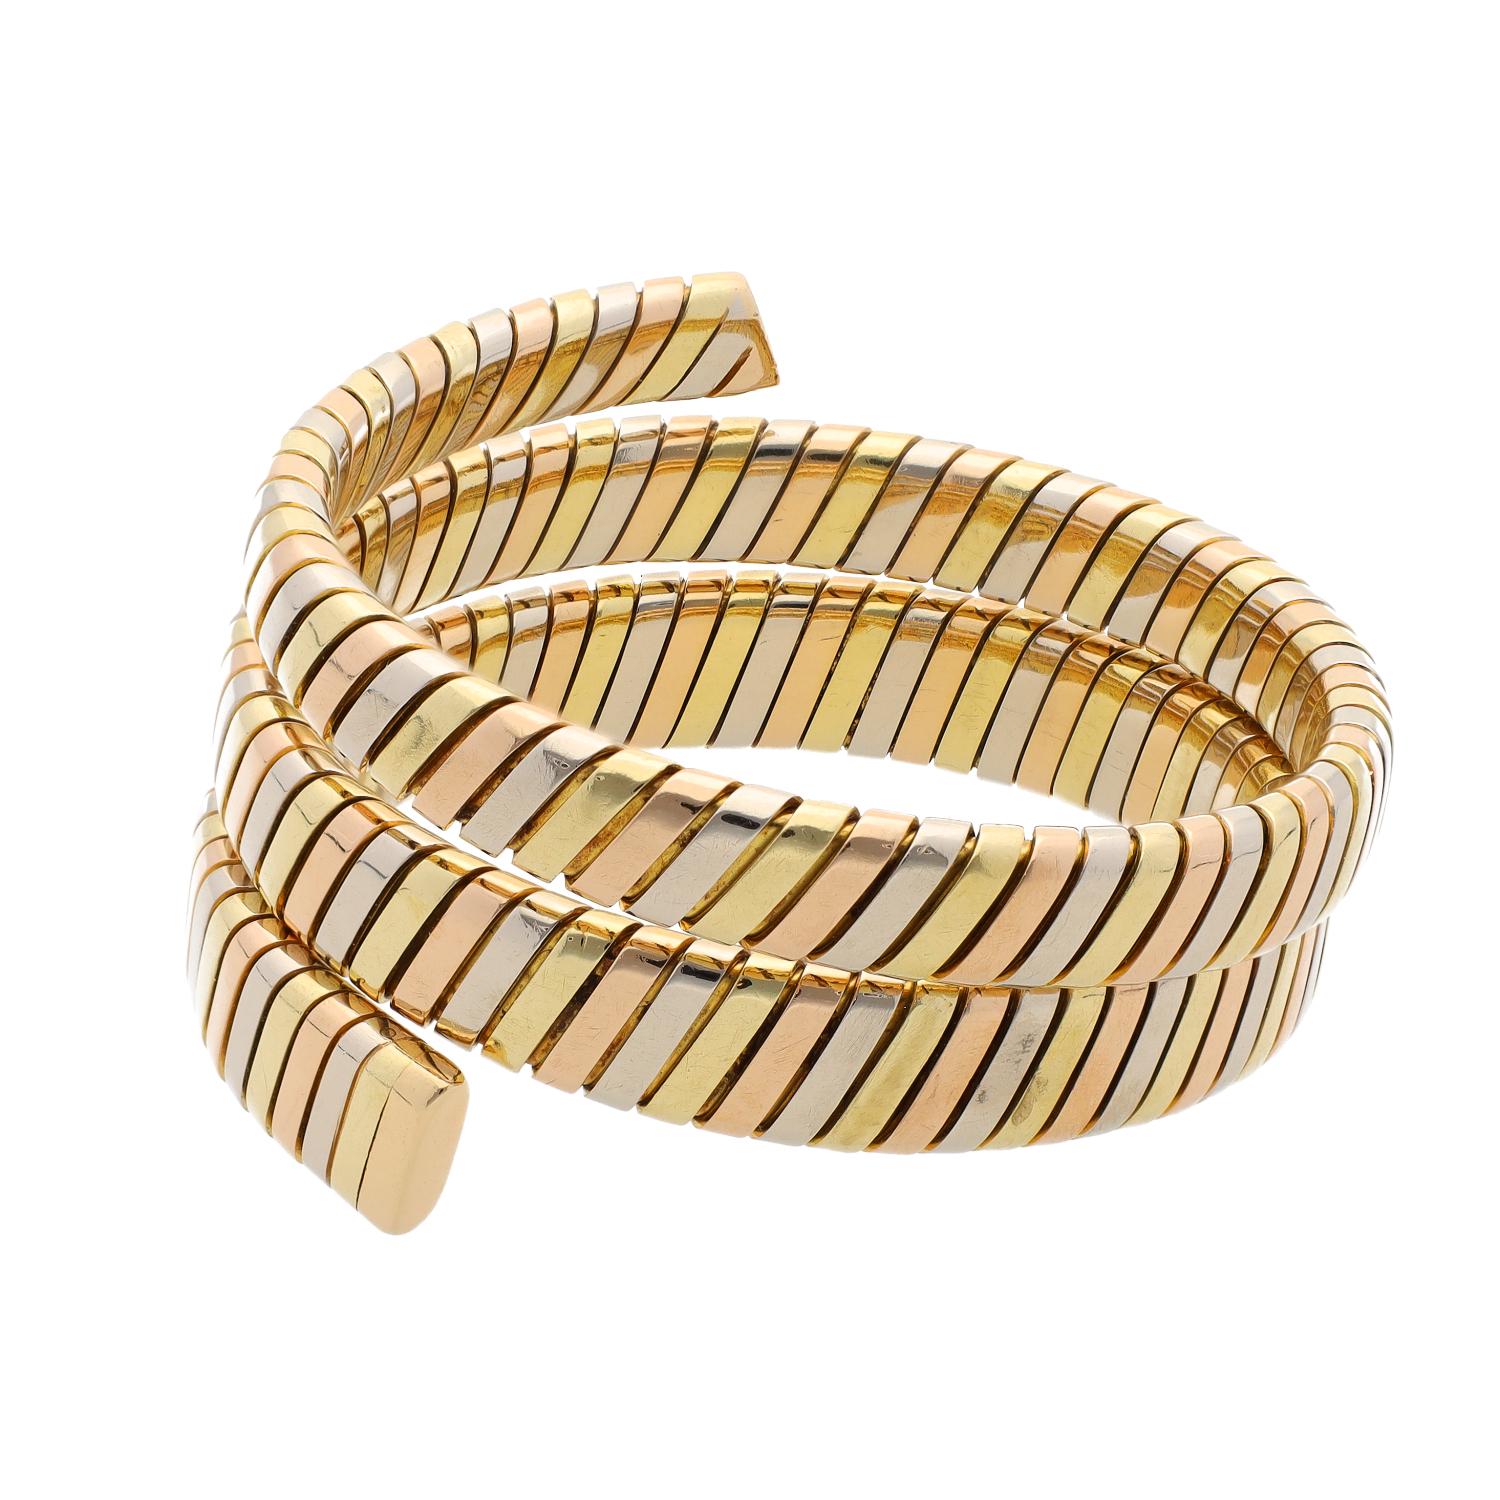 Bvlgari Roma Vintage Tre Colore Gold Tubogas Tapered Spiral Bracelet

Bulgari Rome 1980s yellow, red, white 18kt gold Tubogas tapered spiral bracelet from our Signed Jewels Vintage Collection. Fully signed and marked Bulgari